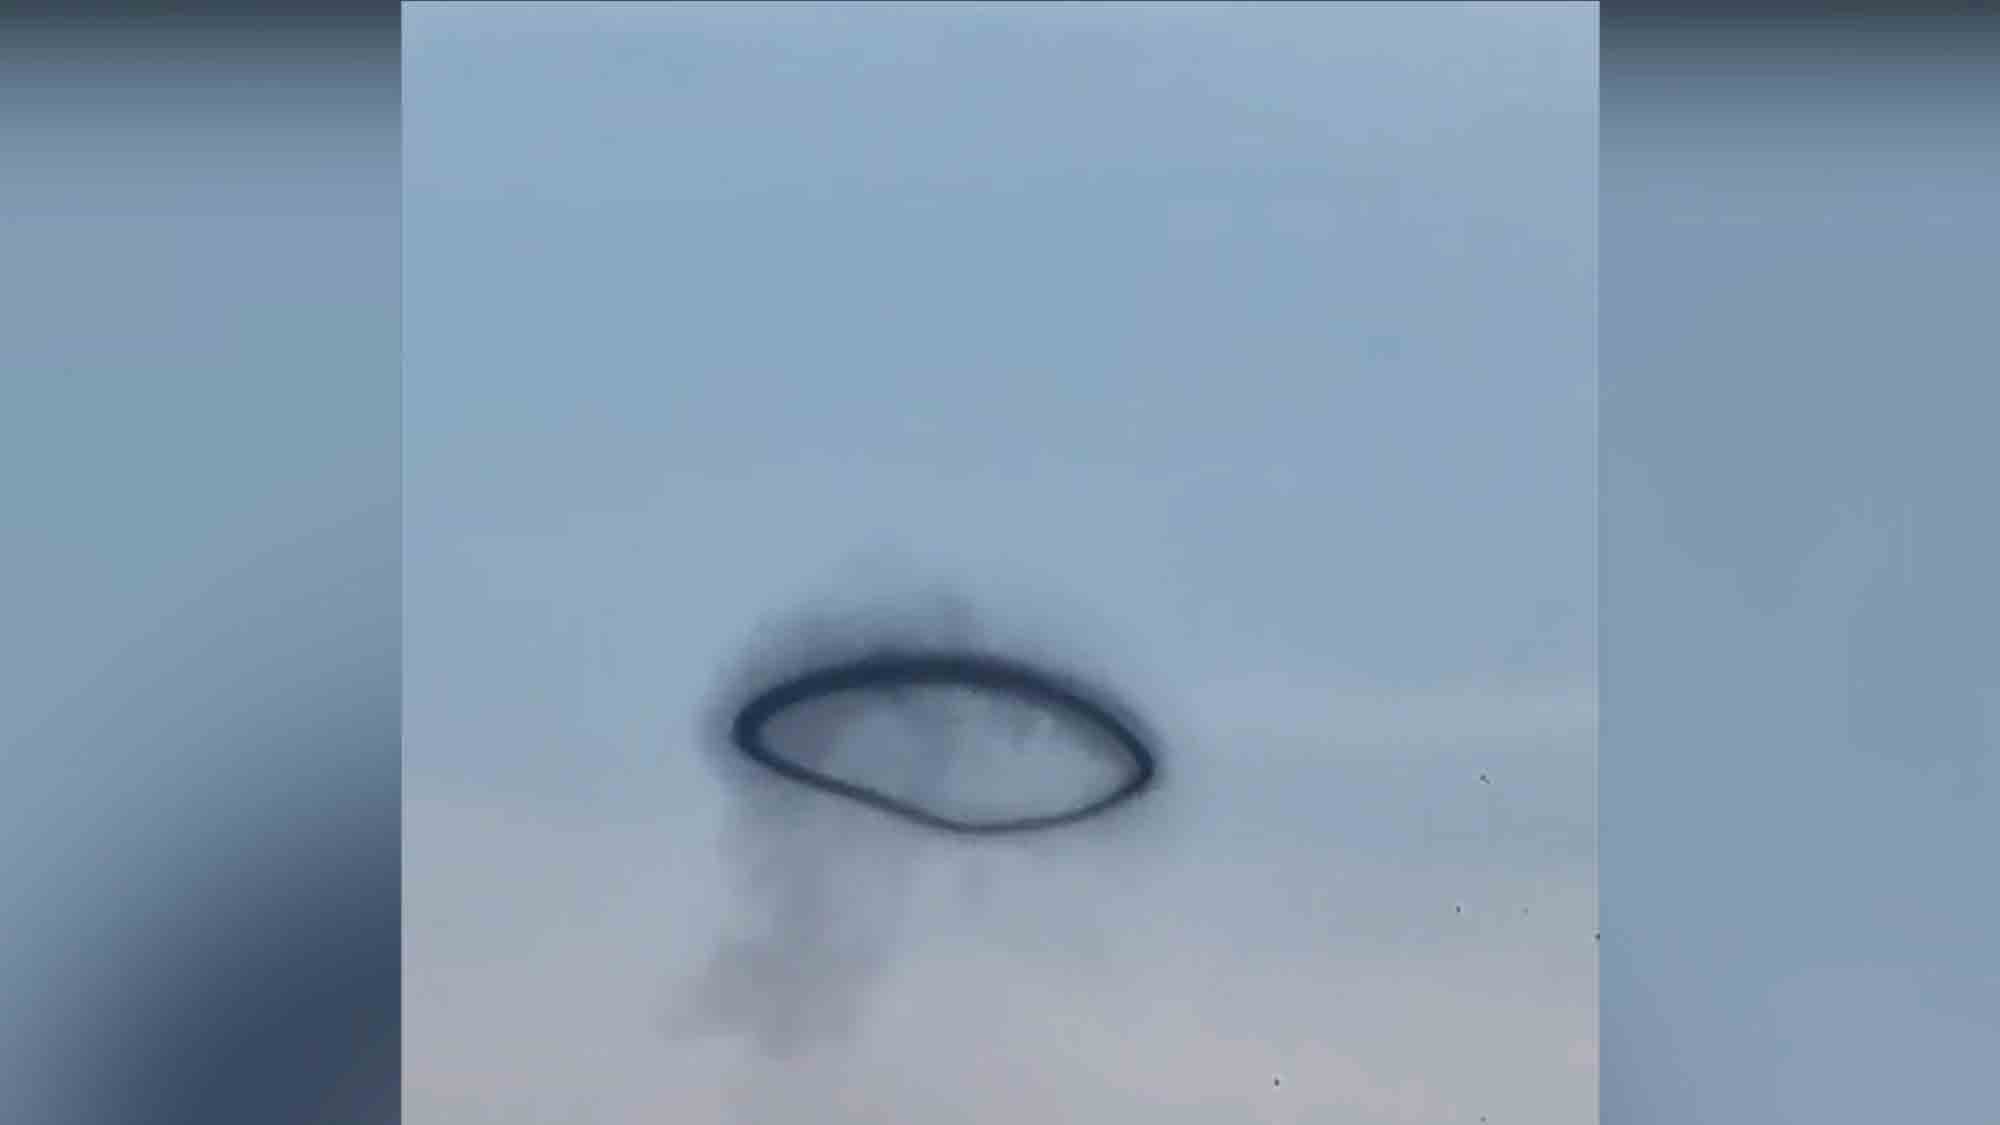 Mysterious Smoke Circle In Sky Baffles People In Chinese City